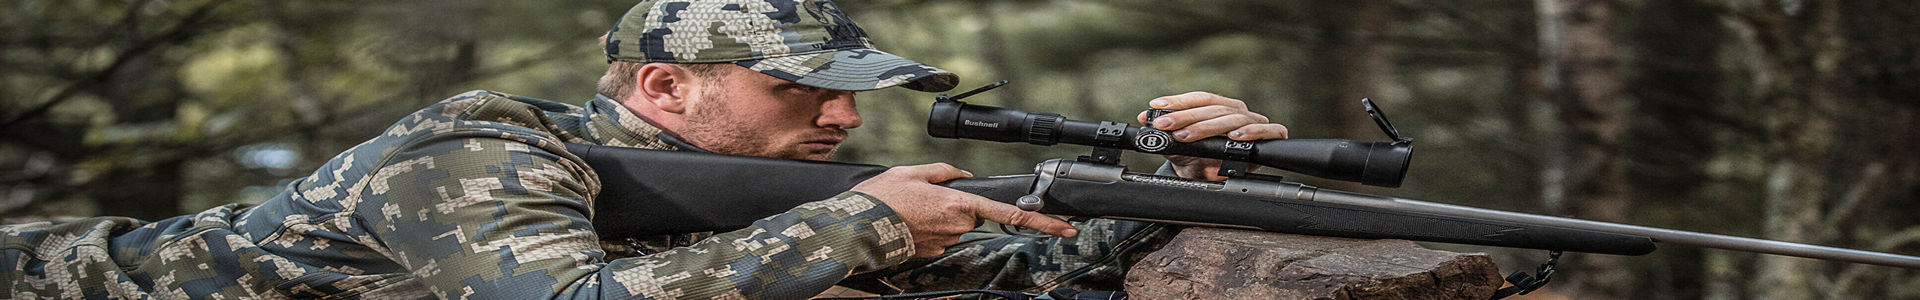 The paradise for shooters: the blog that will help you pick the top-notch scopes and scatter guns